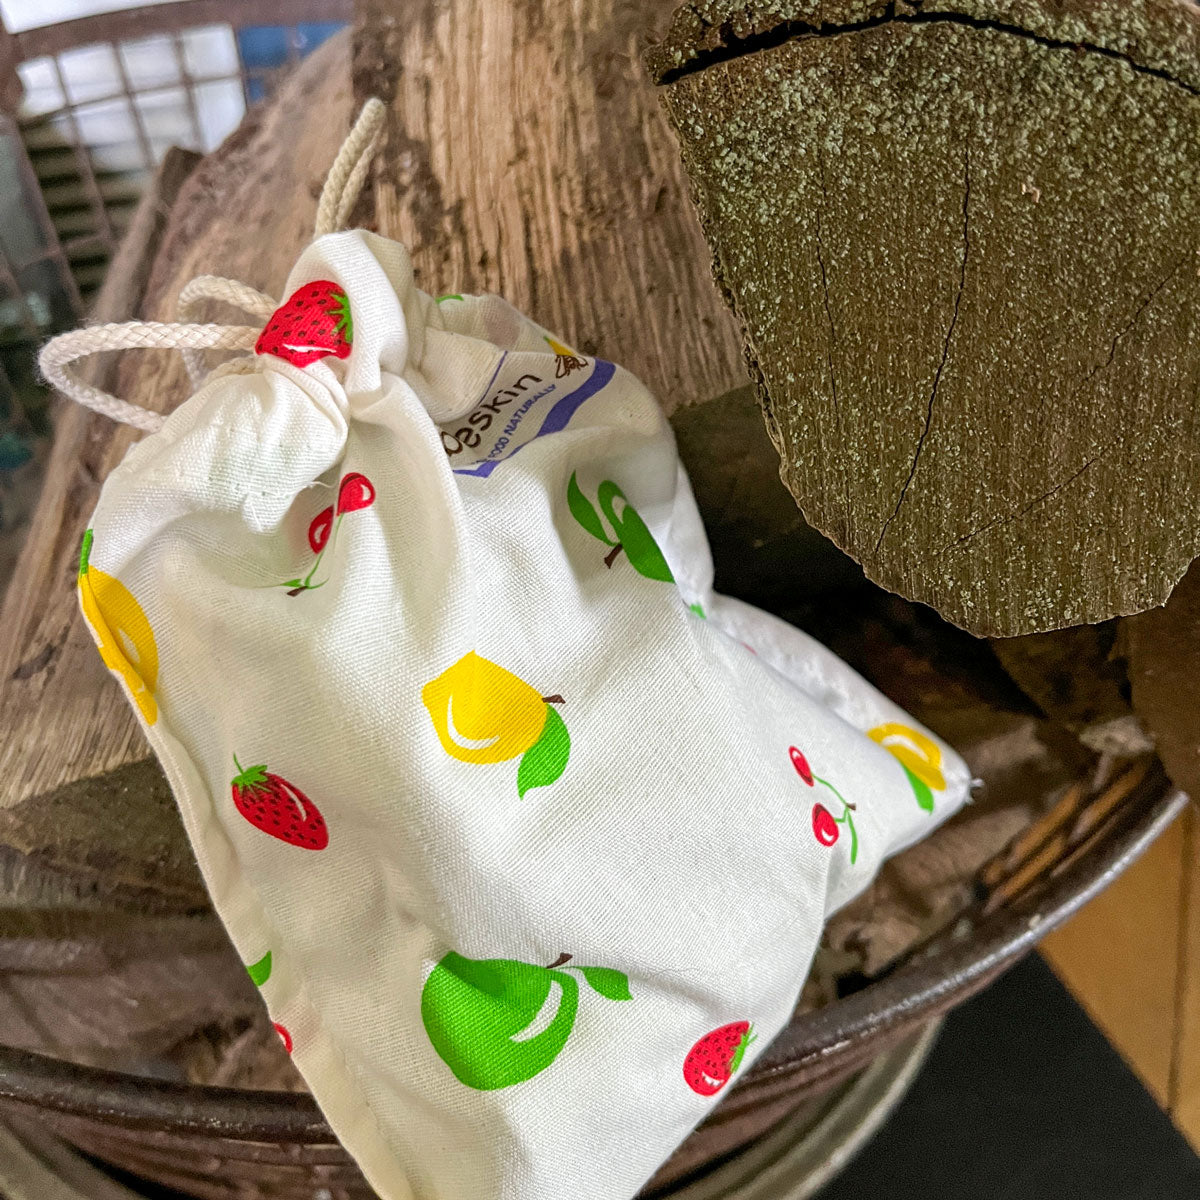 fabric bag with fruit print closed with a twine lies on firewood  